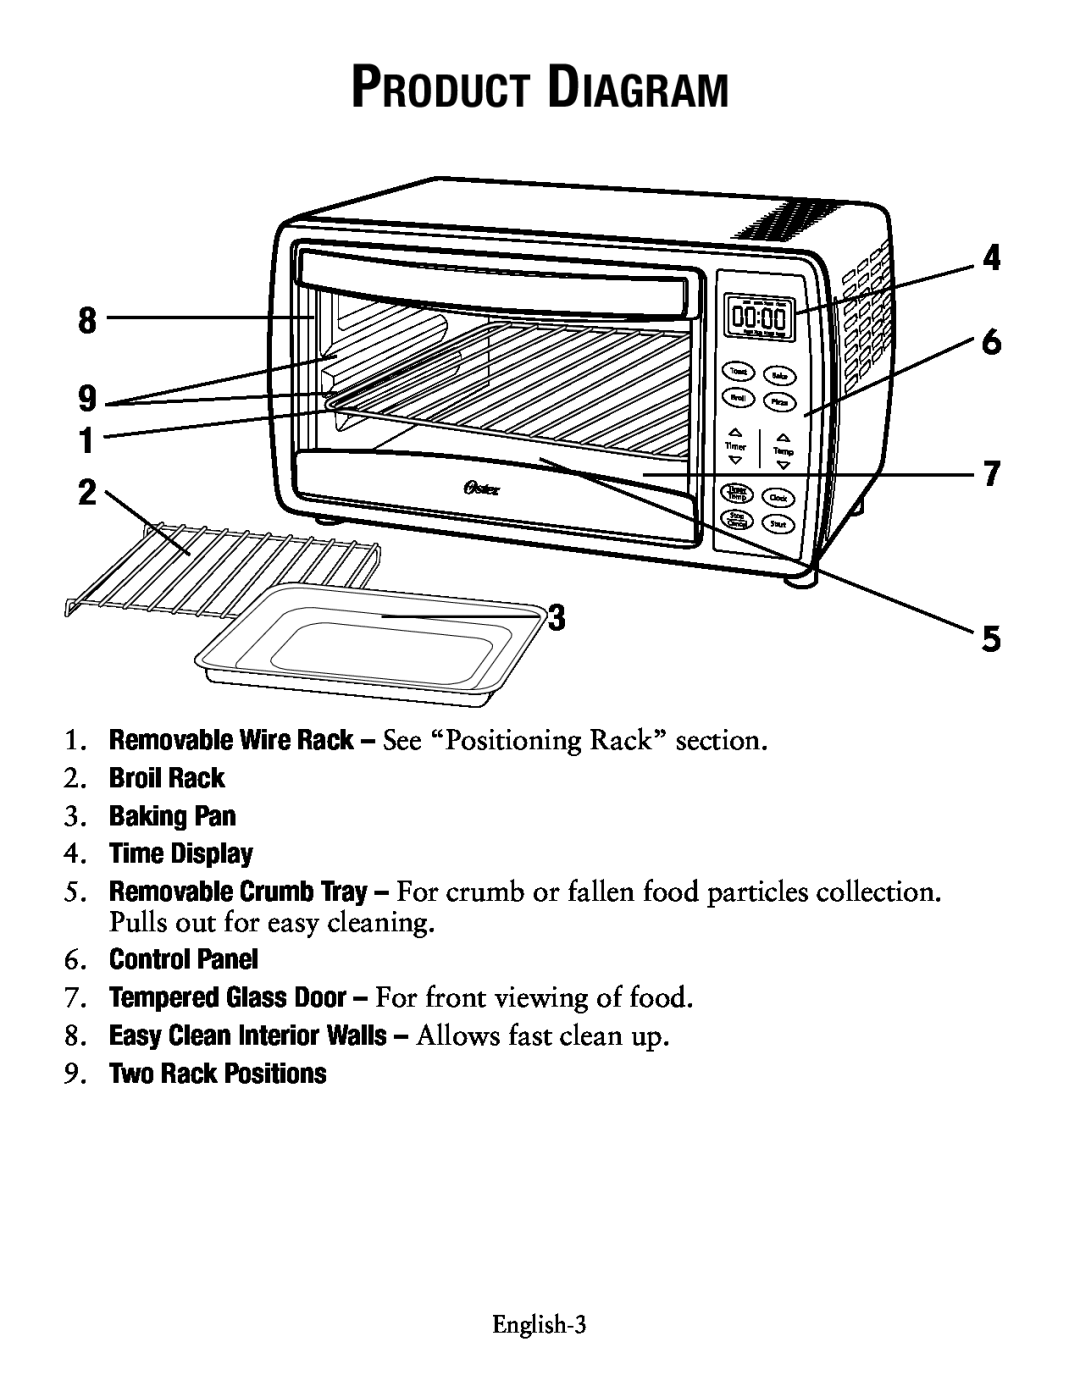 Oster TSSTTVDGSM Product Diagram, Removable Wire Rack - See “Positioning Rack” . Broil Rack, Baking Pan 4. Time Display 